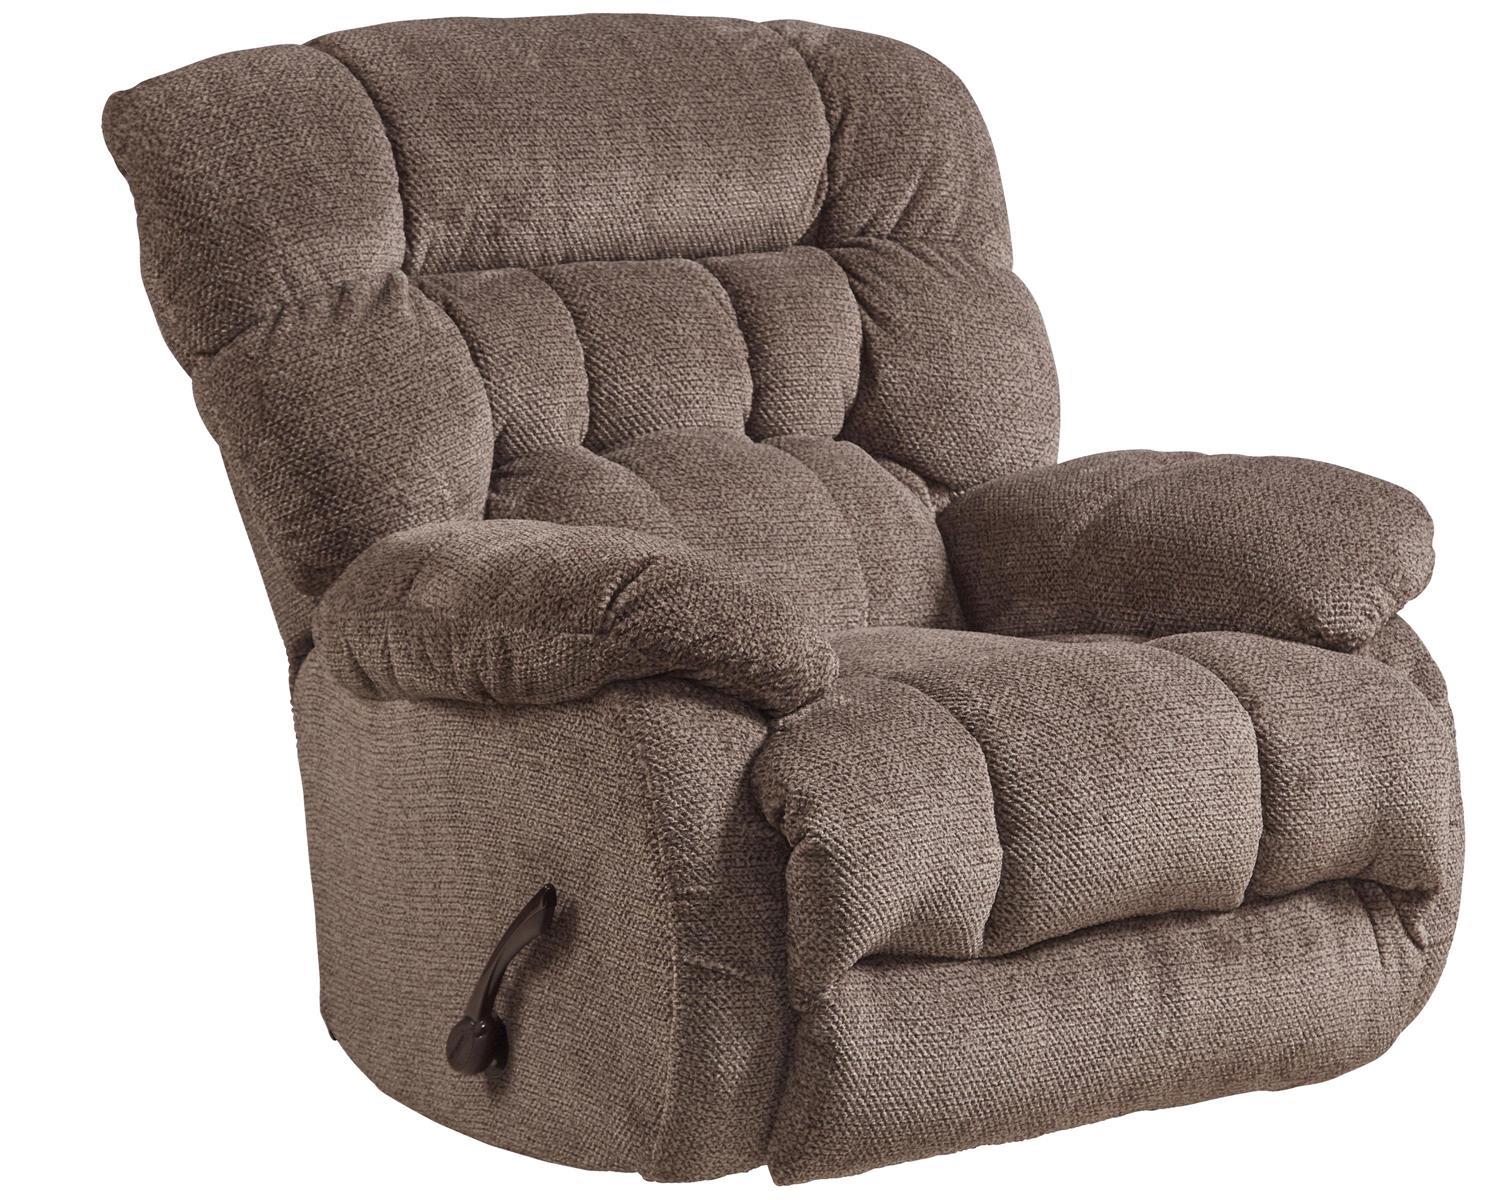 Catnapper Daly Chaise Swivel Glider Recliner in Chateau